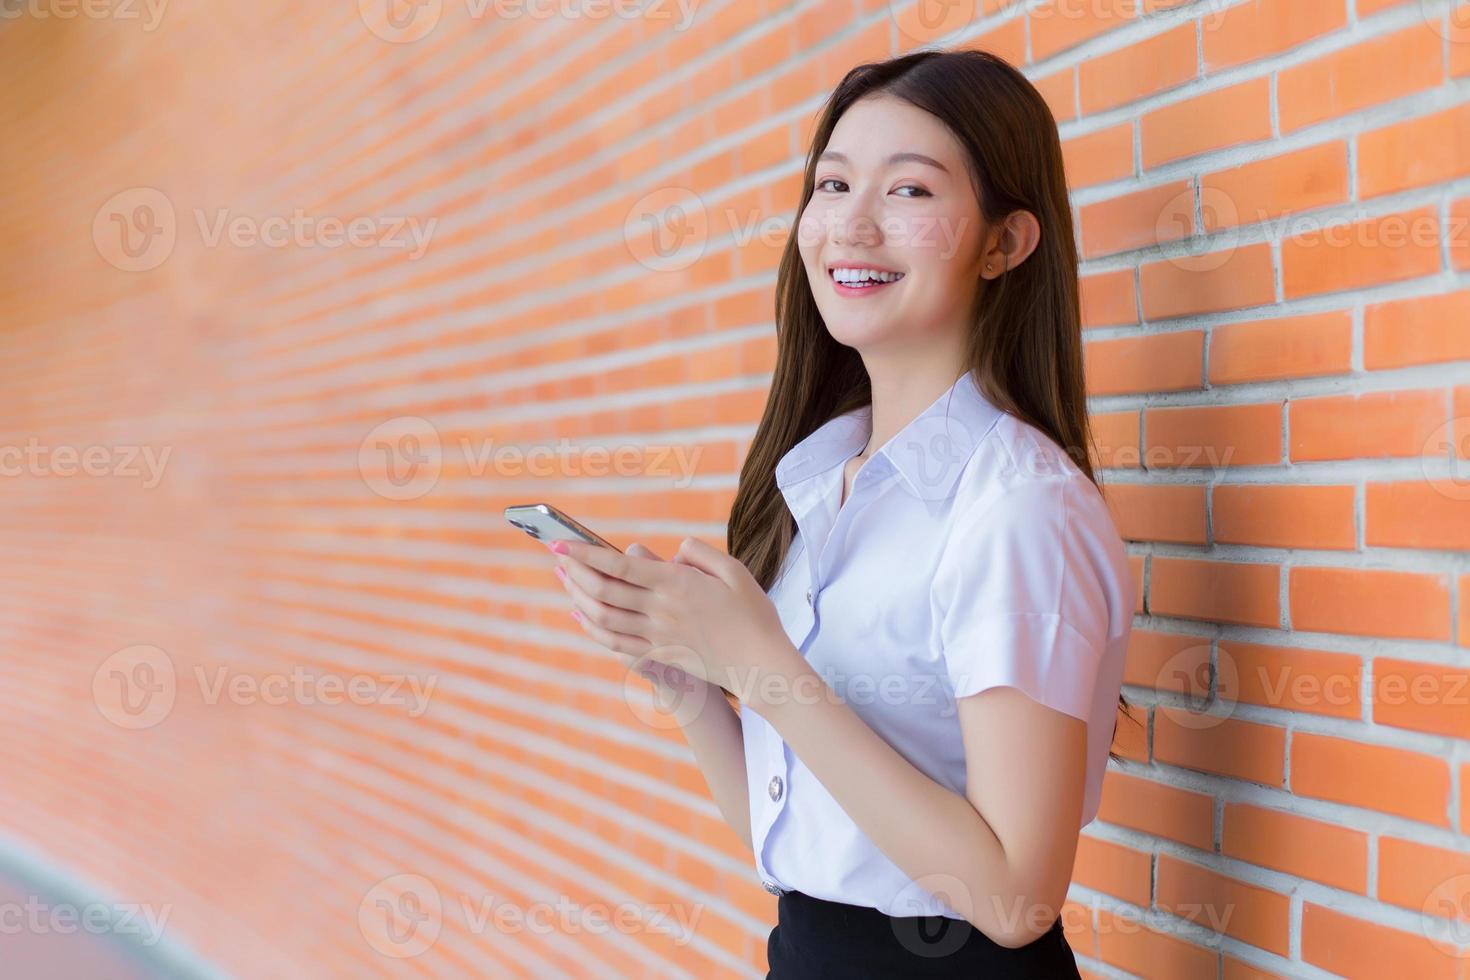 Portrait of an Asian Thai woman student in a uniform is smiling happily while using a smartphone at university with brick walls as a background. photo